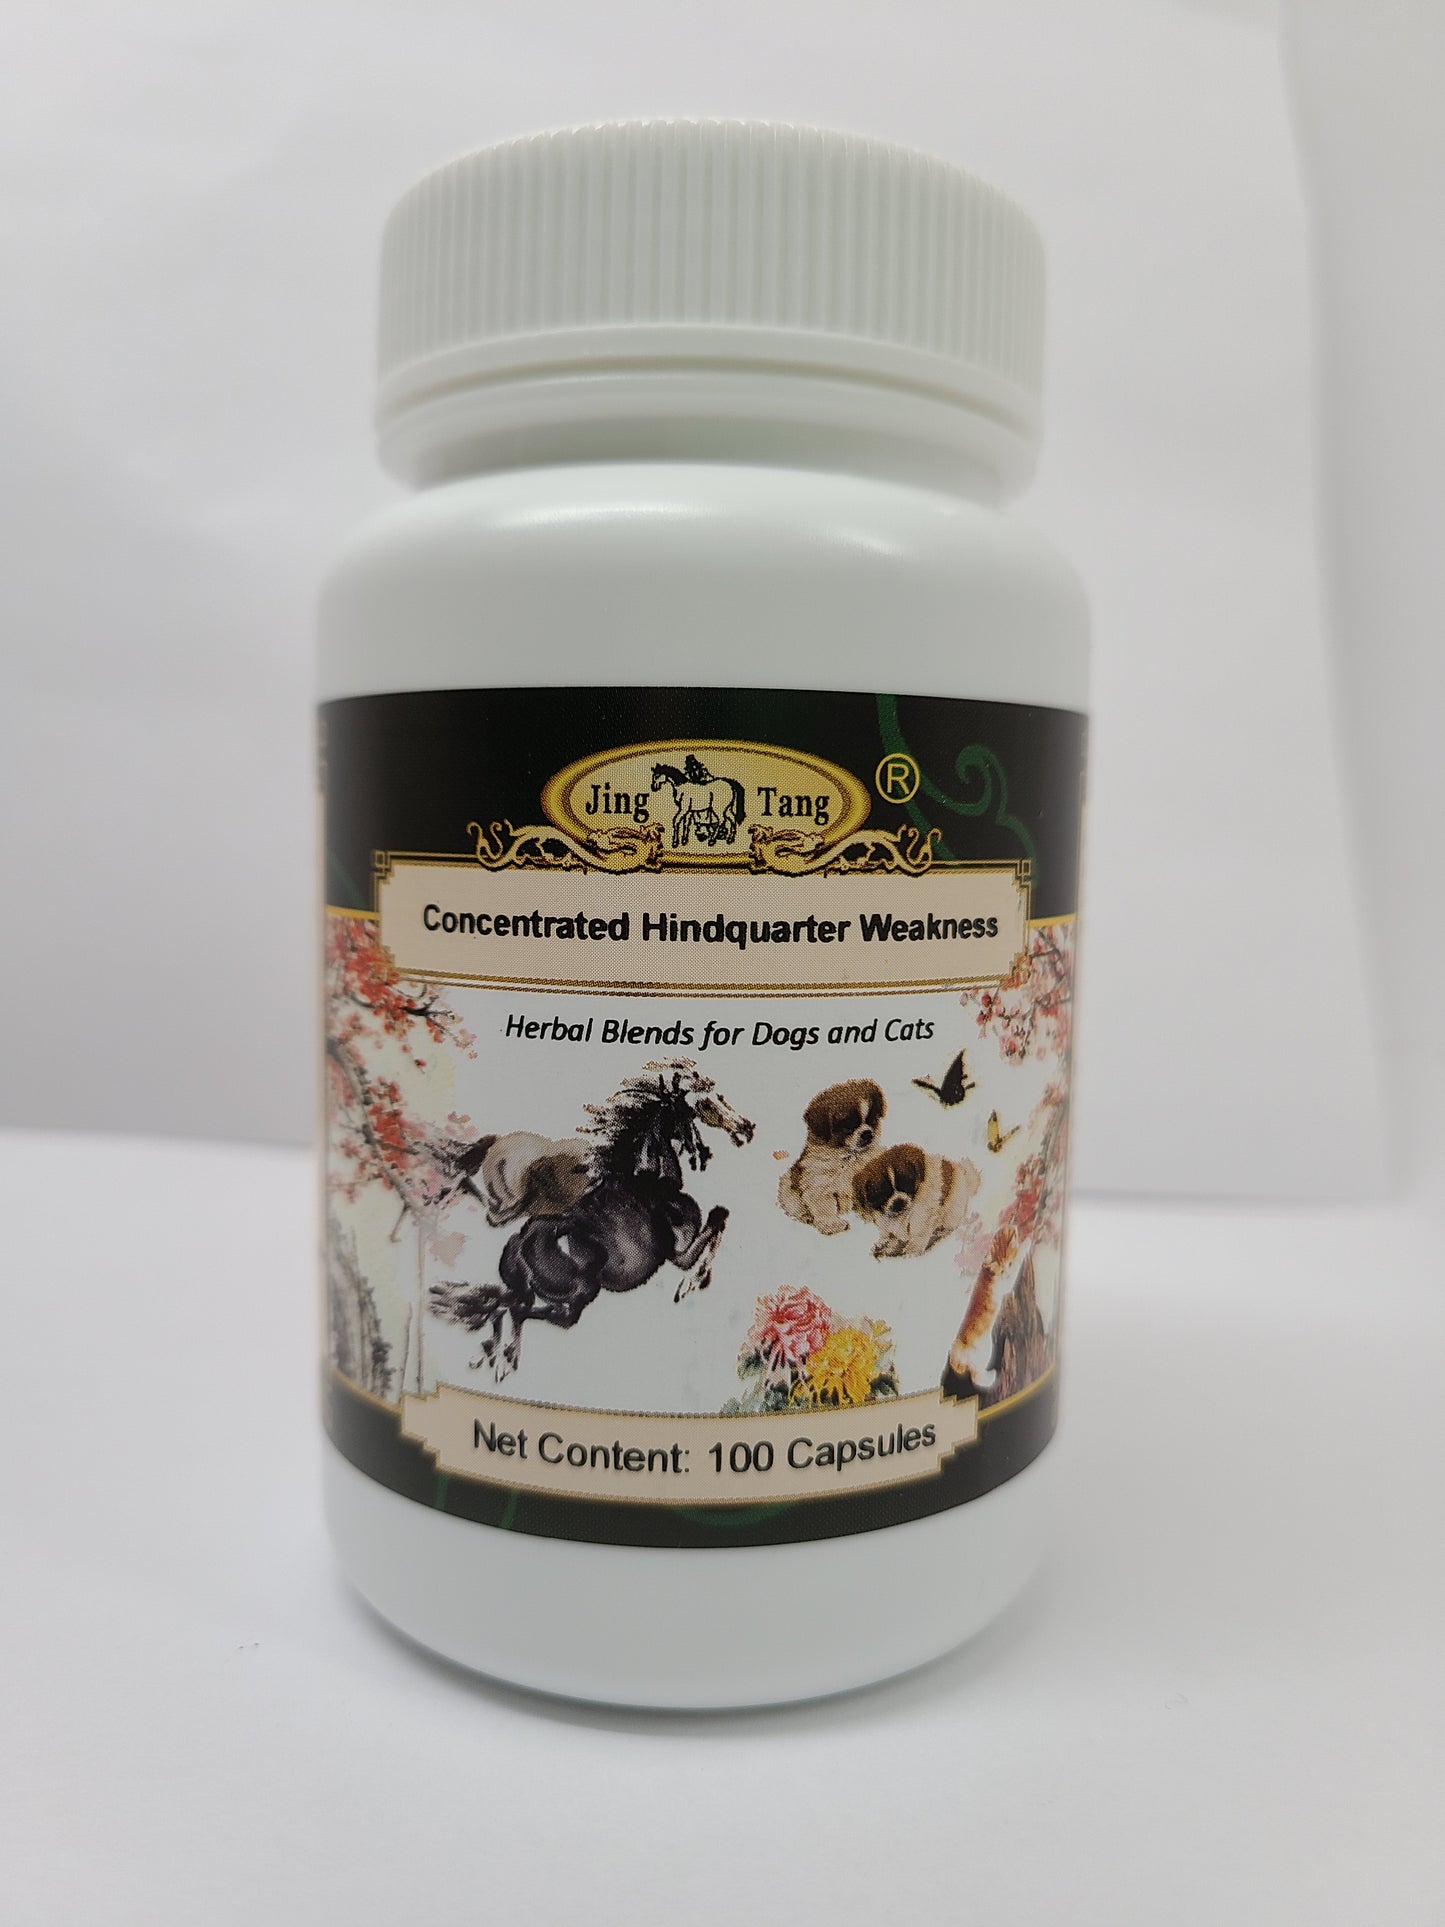 Jing Tang Herbals :Concentrated Hindquarter Weakness 0.5g capsule (100 capsule bottle)